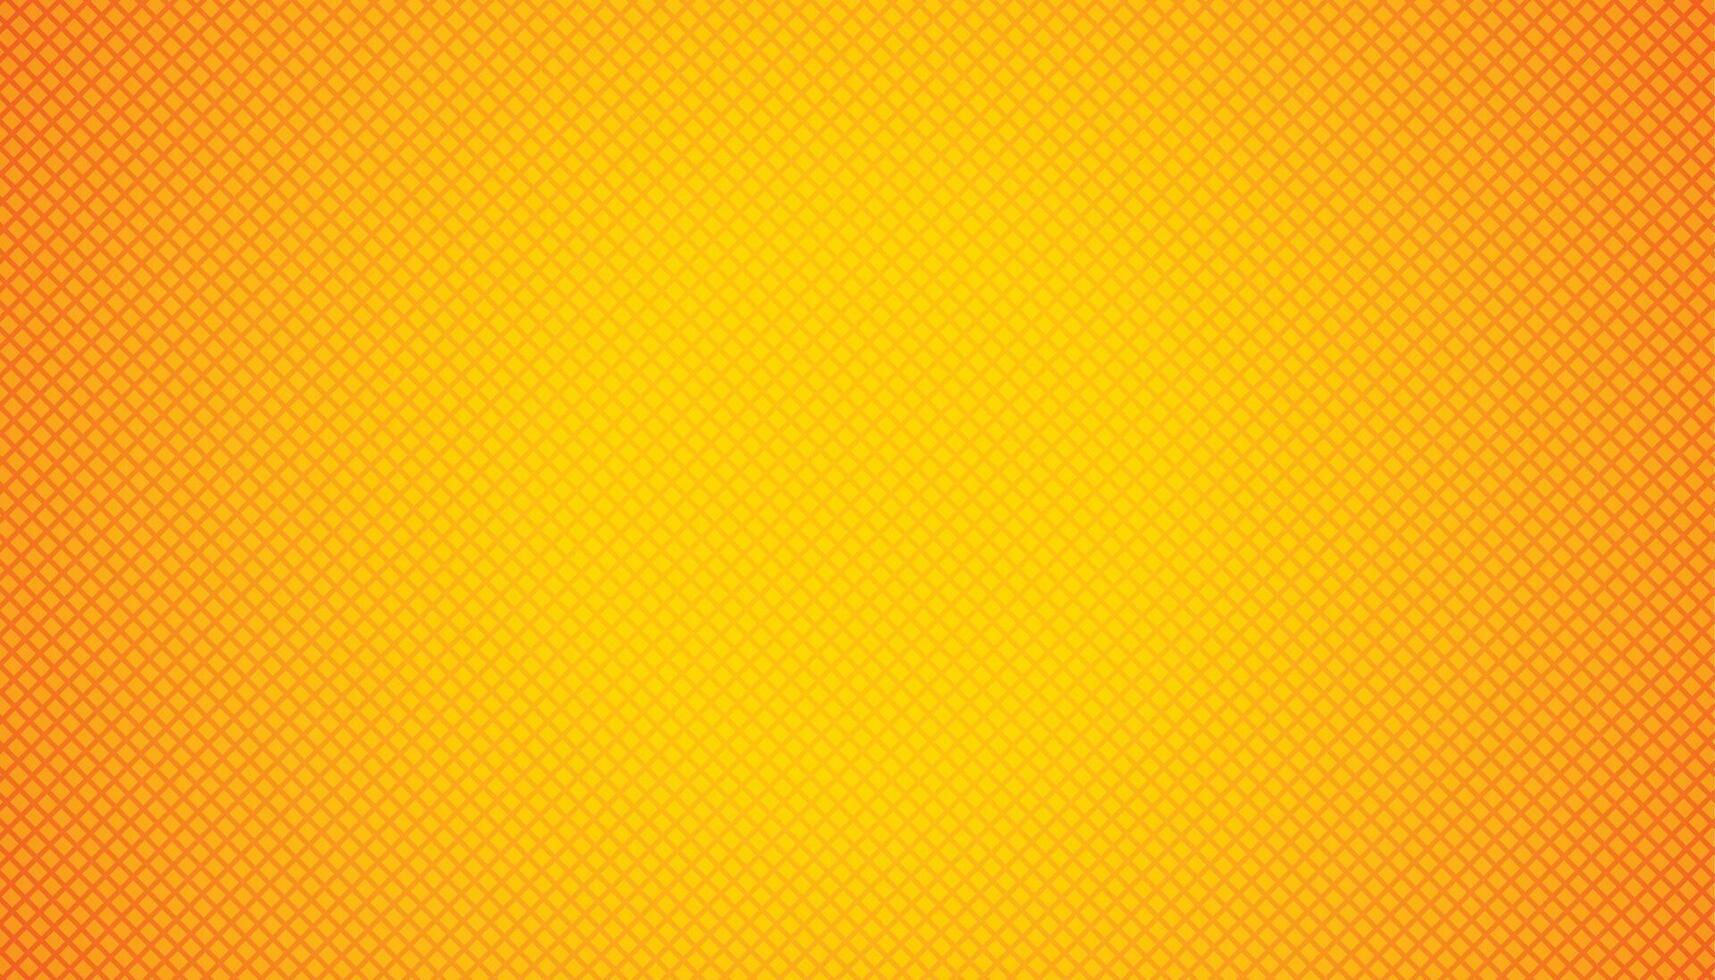 orange yellow empty background with geometric patterns vector